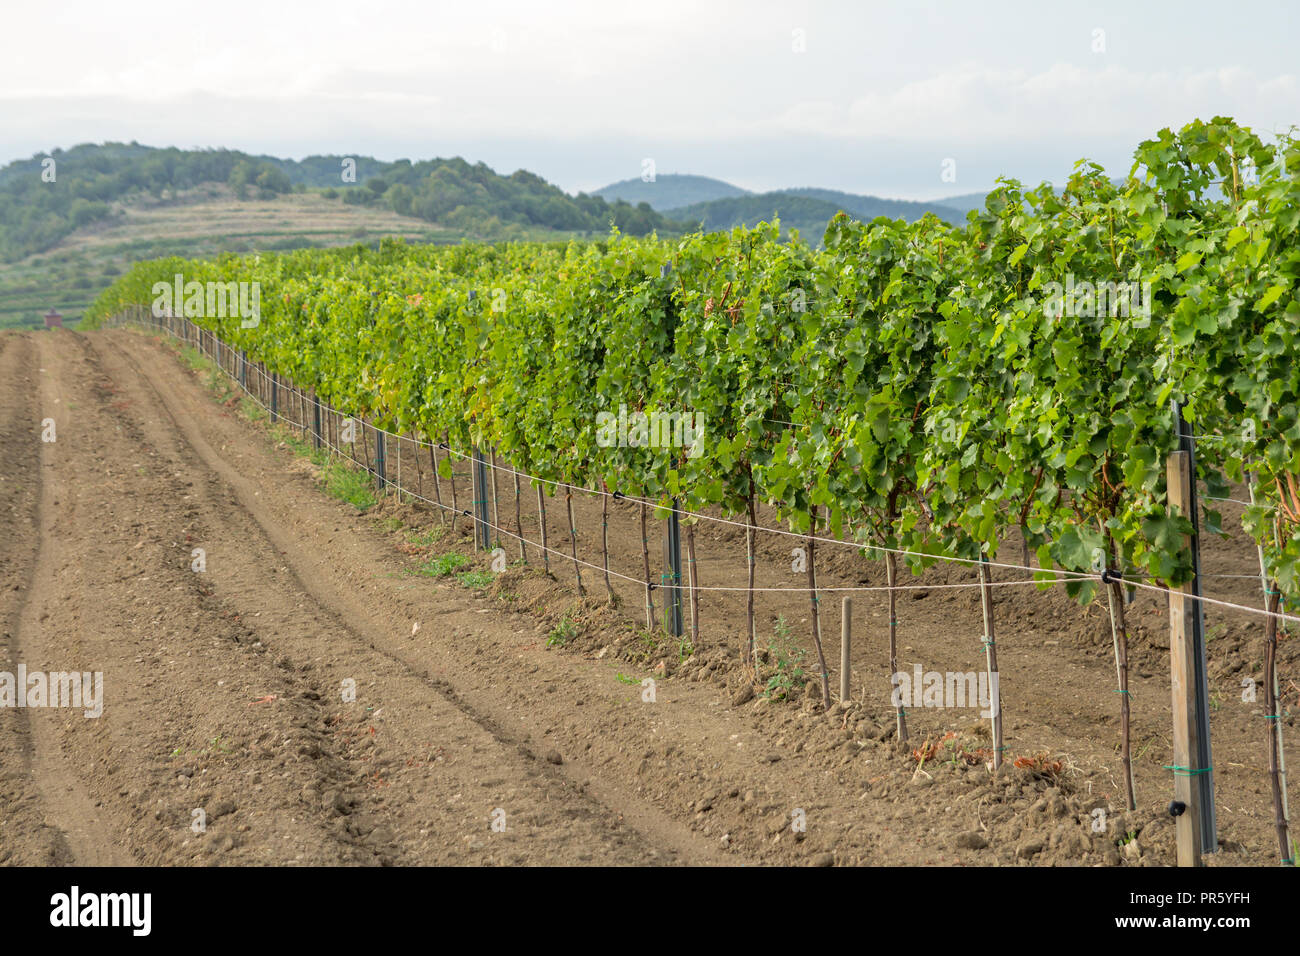 agriculture land with vineyard Stock Photo